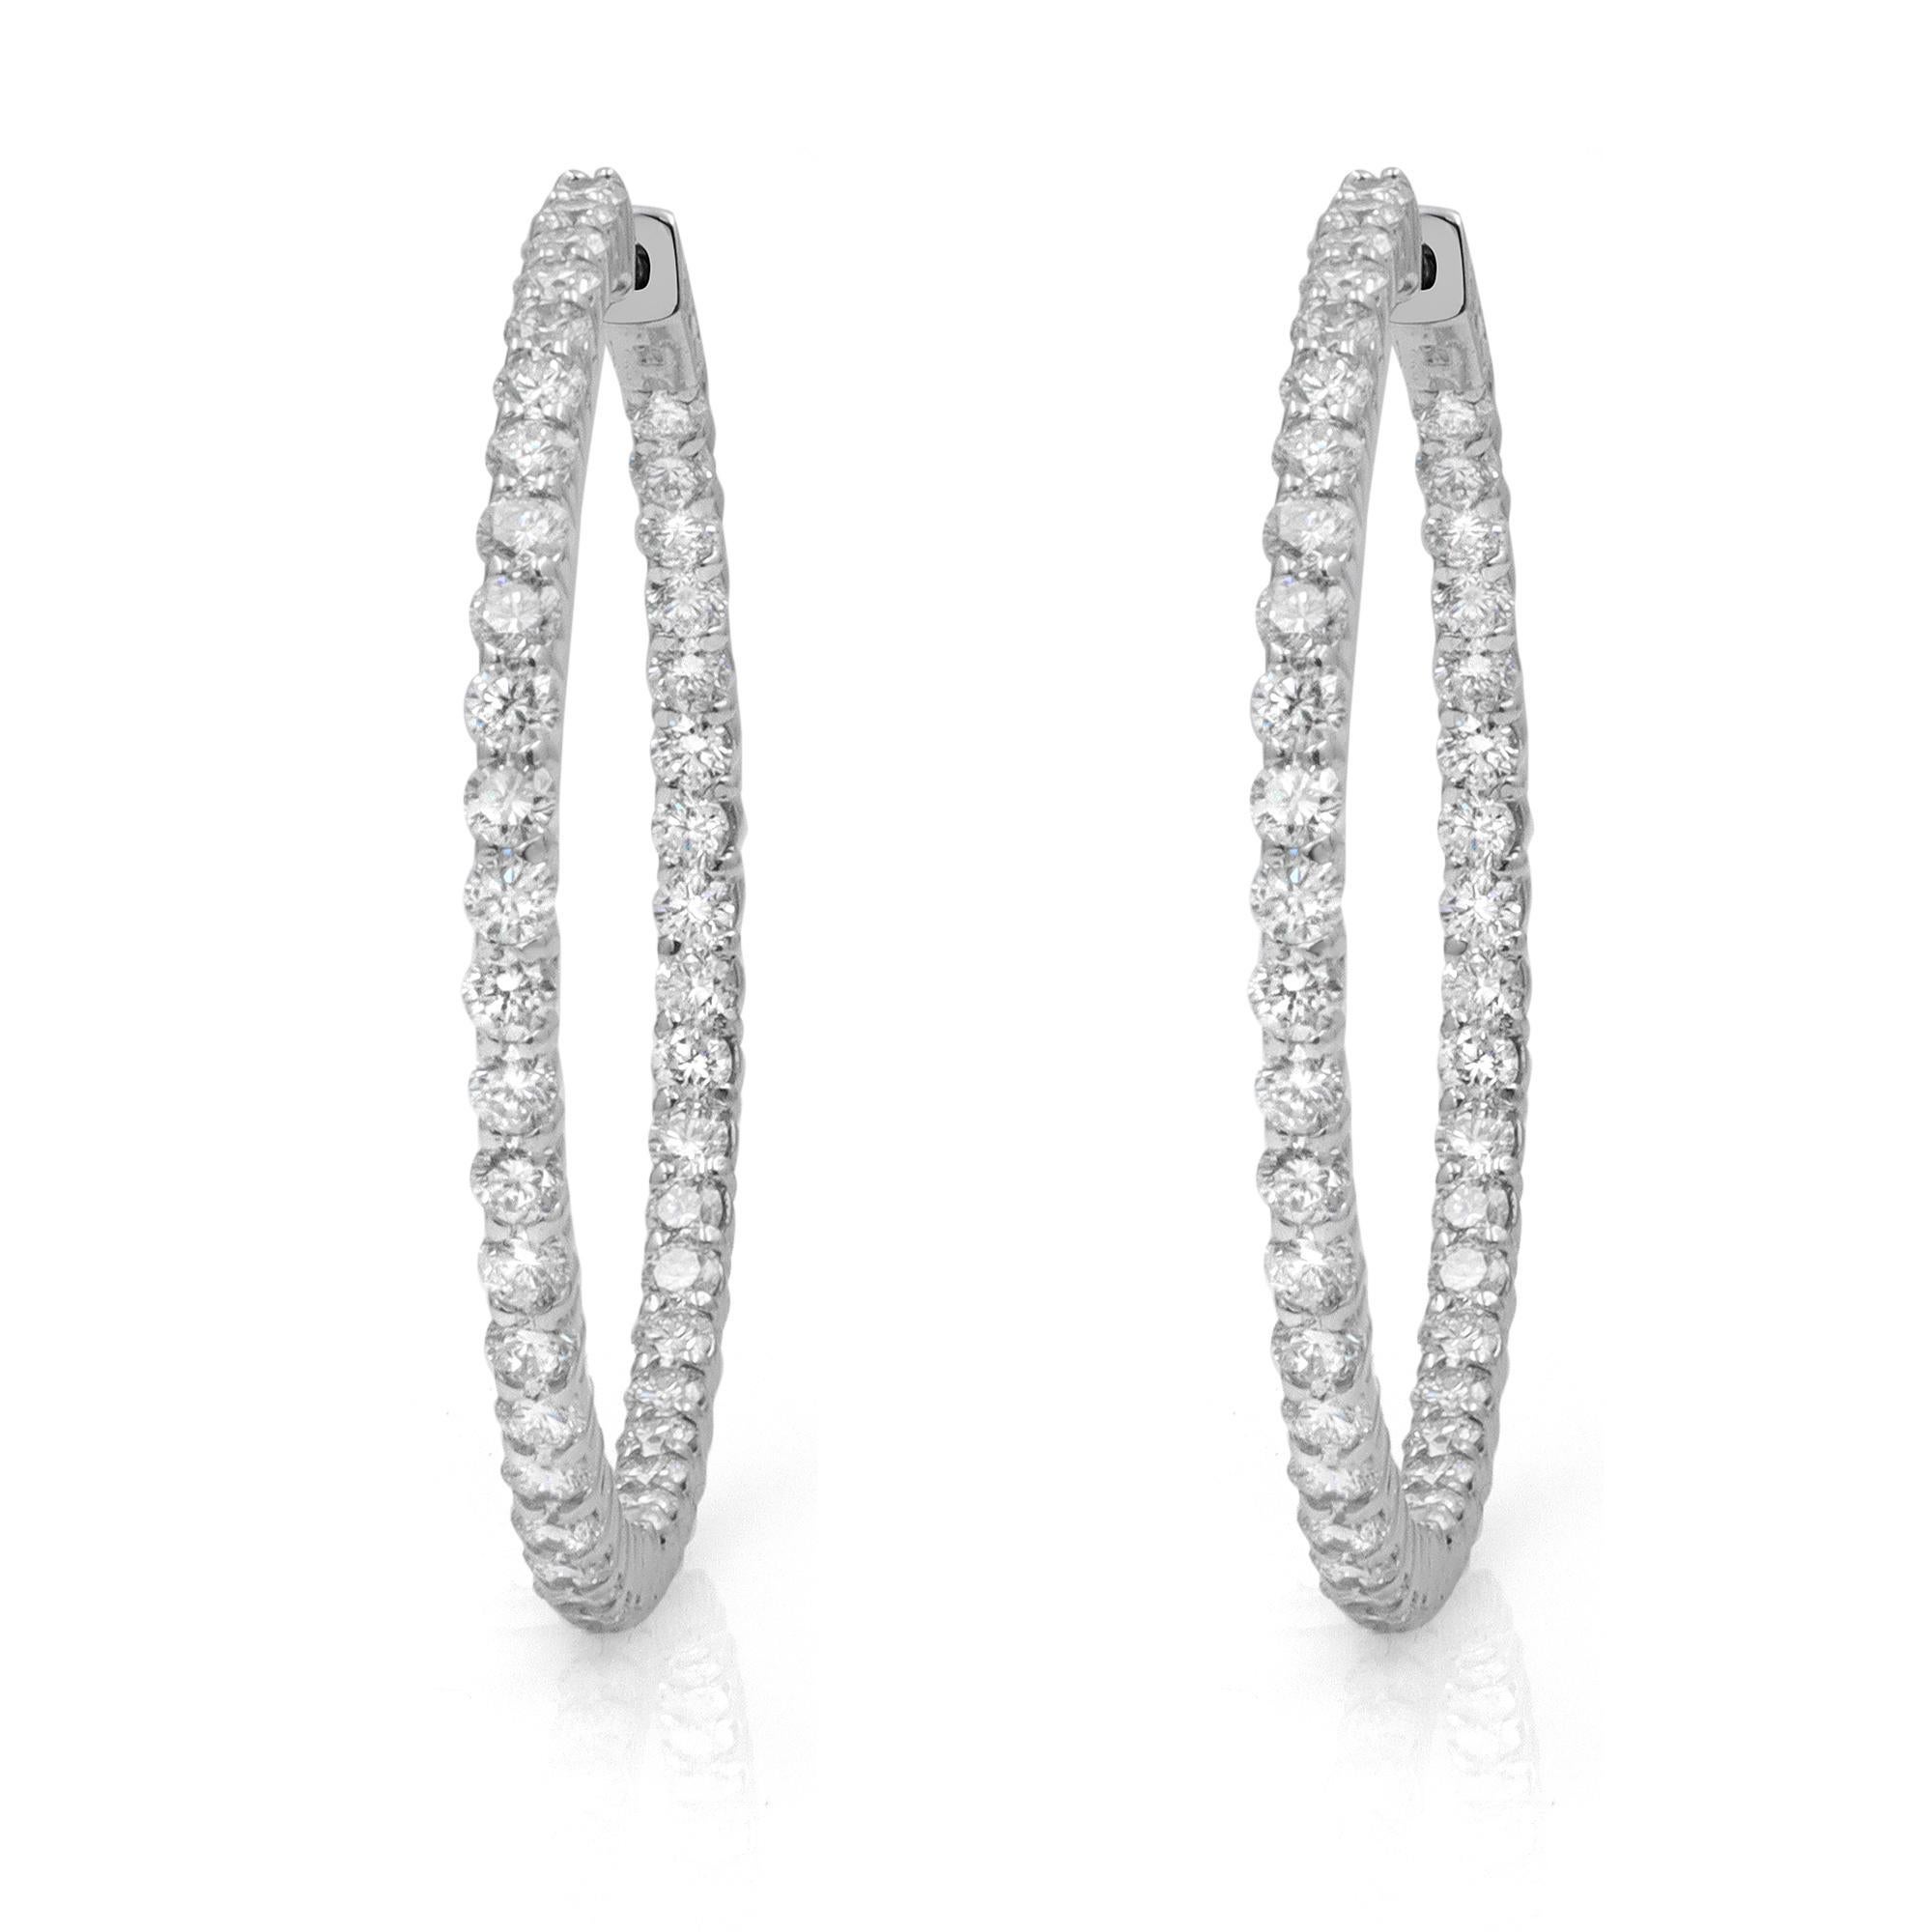 These stylish and elegant 14k white gold hoop earrings feature prong-set round diamonds in a single line. The diamonds embellish these earrings on the inside and the outside, offering a dazzling look from every angle. Total carat weight 5.61cttw.